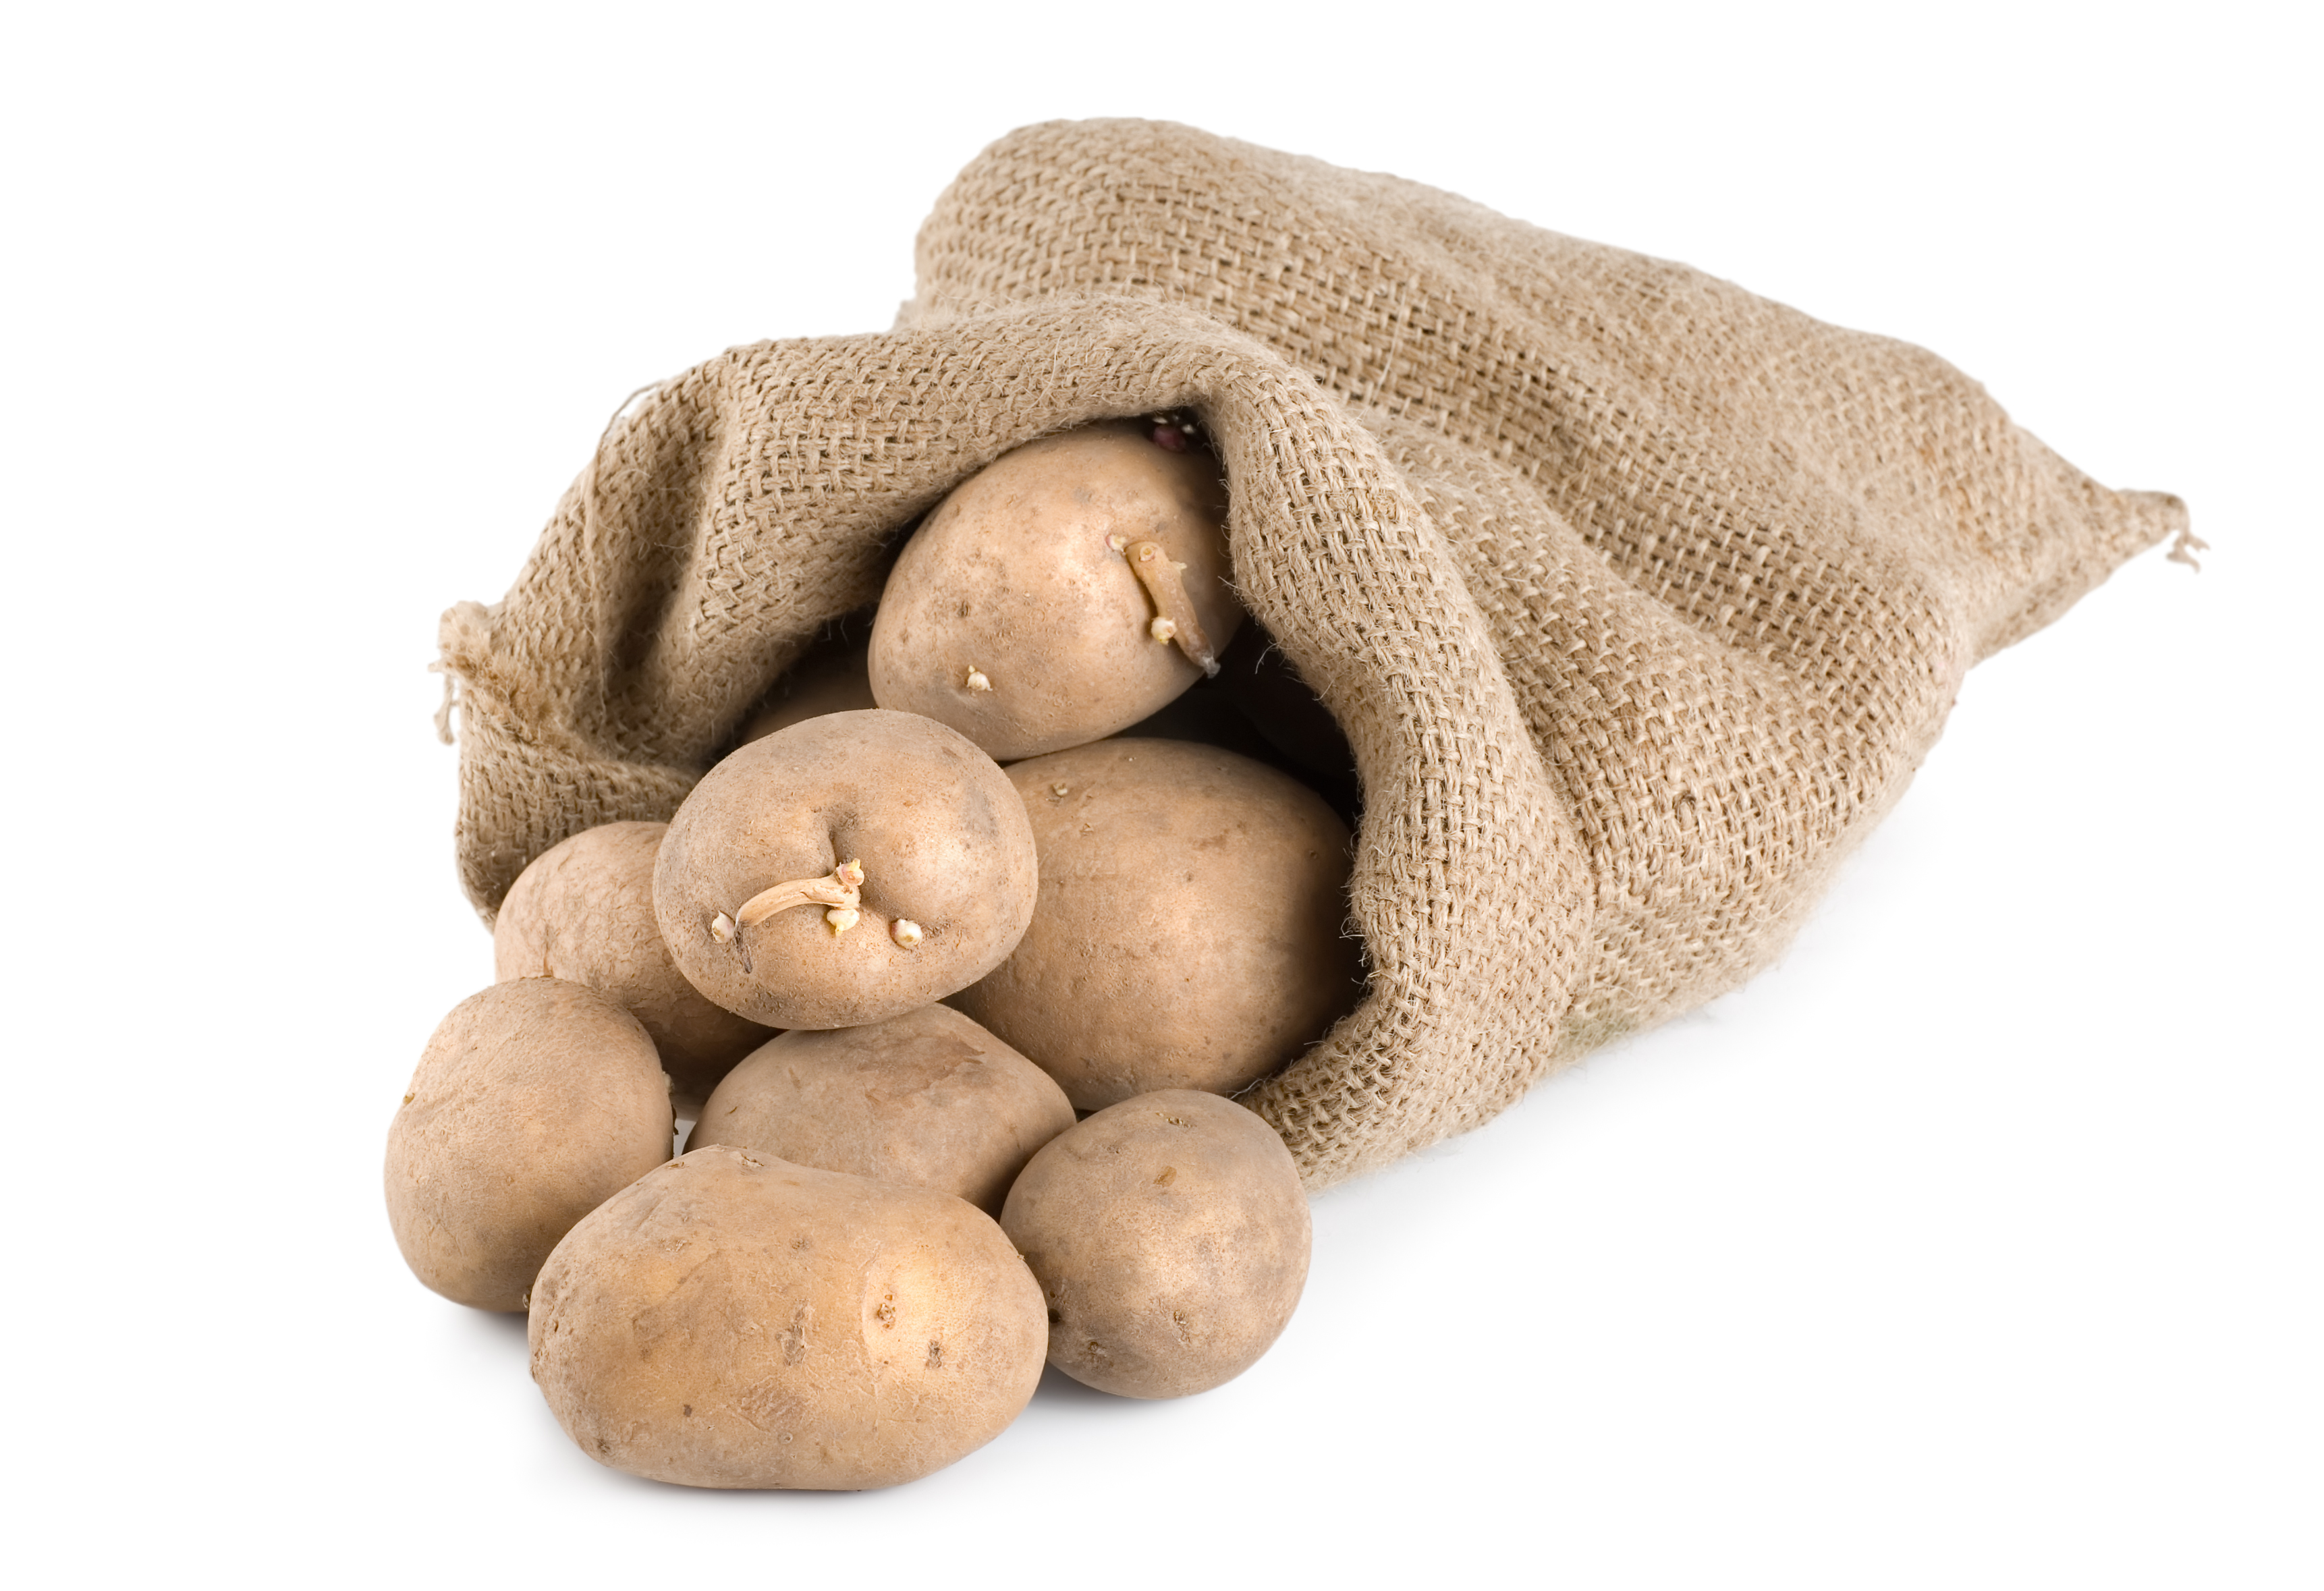 Natural Elements KitchenCraft Potato Bag with Blackout Lining, Hessian,  Brown, 24 x 24cm